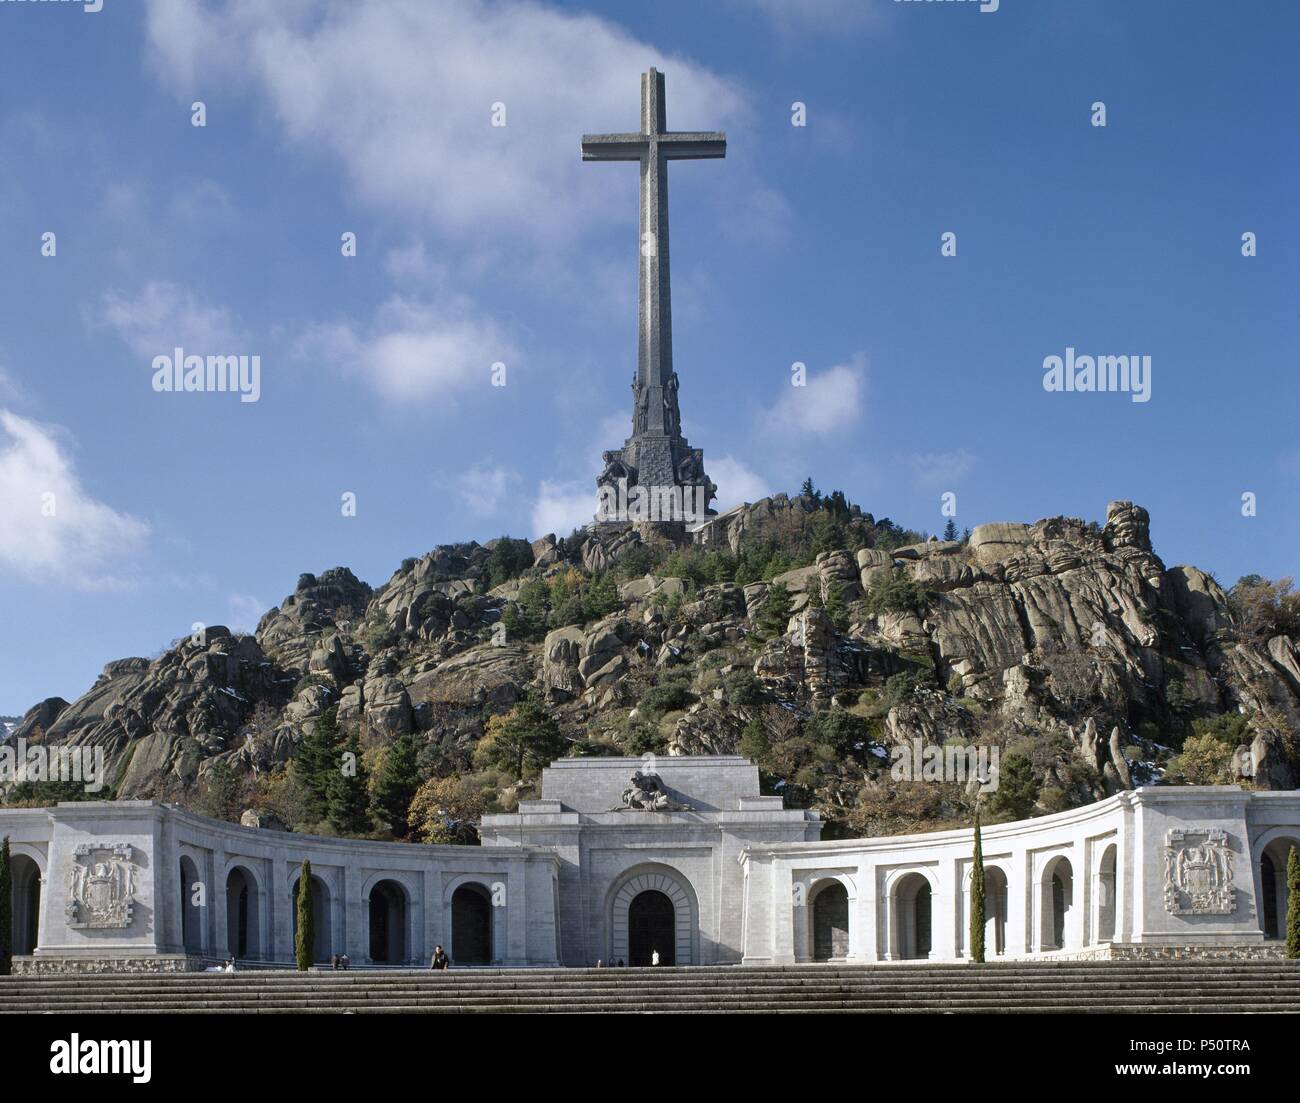 Spain. Valley of the Fallen (Valle de los Caidos). 1940-1958. Monumental memorial dedicated by the Franco regime to the dead of the Spanish Civil War (1936-1939). By Pedro Muguruza (1893-1952) and Diego Mendez (1906-1987). Stock Photo